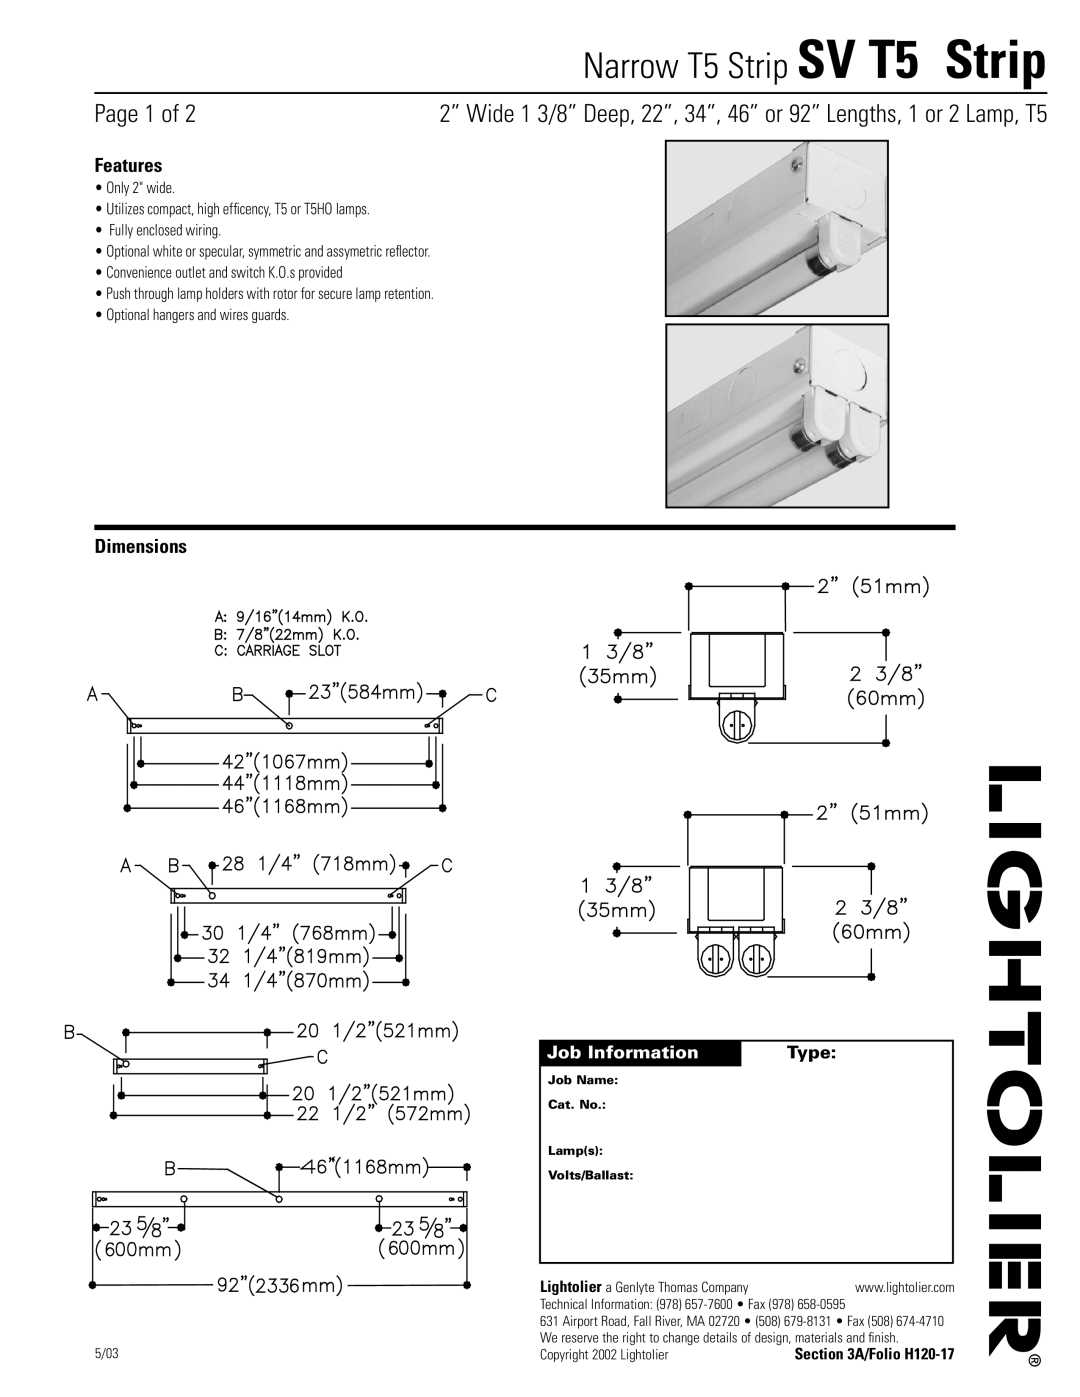 Lightolier SV T5 STRIP dimensions Page 1 of, Features, Dimensions, Job Information, Type, Narrow T5 Strip SV T5 Strip 